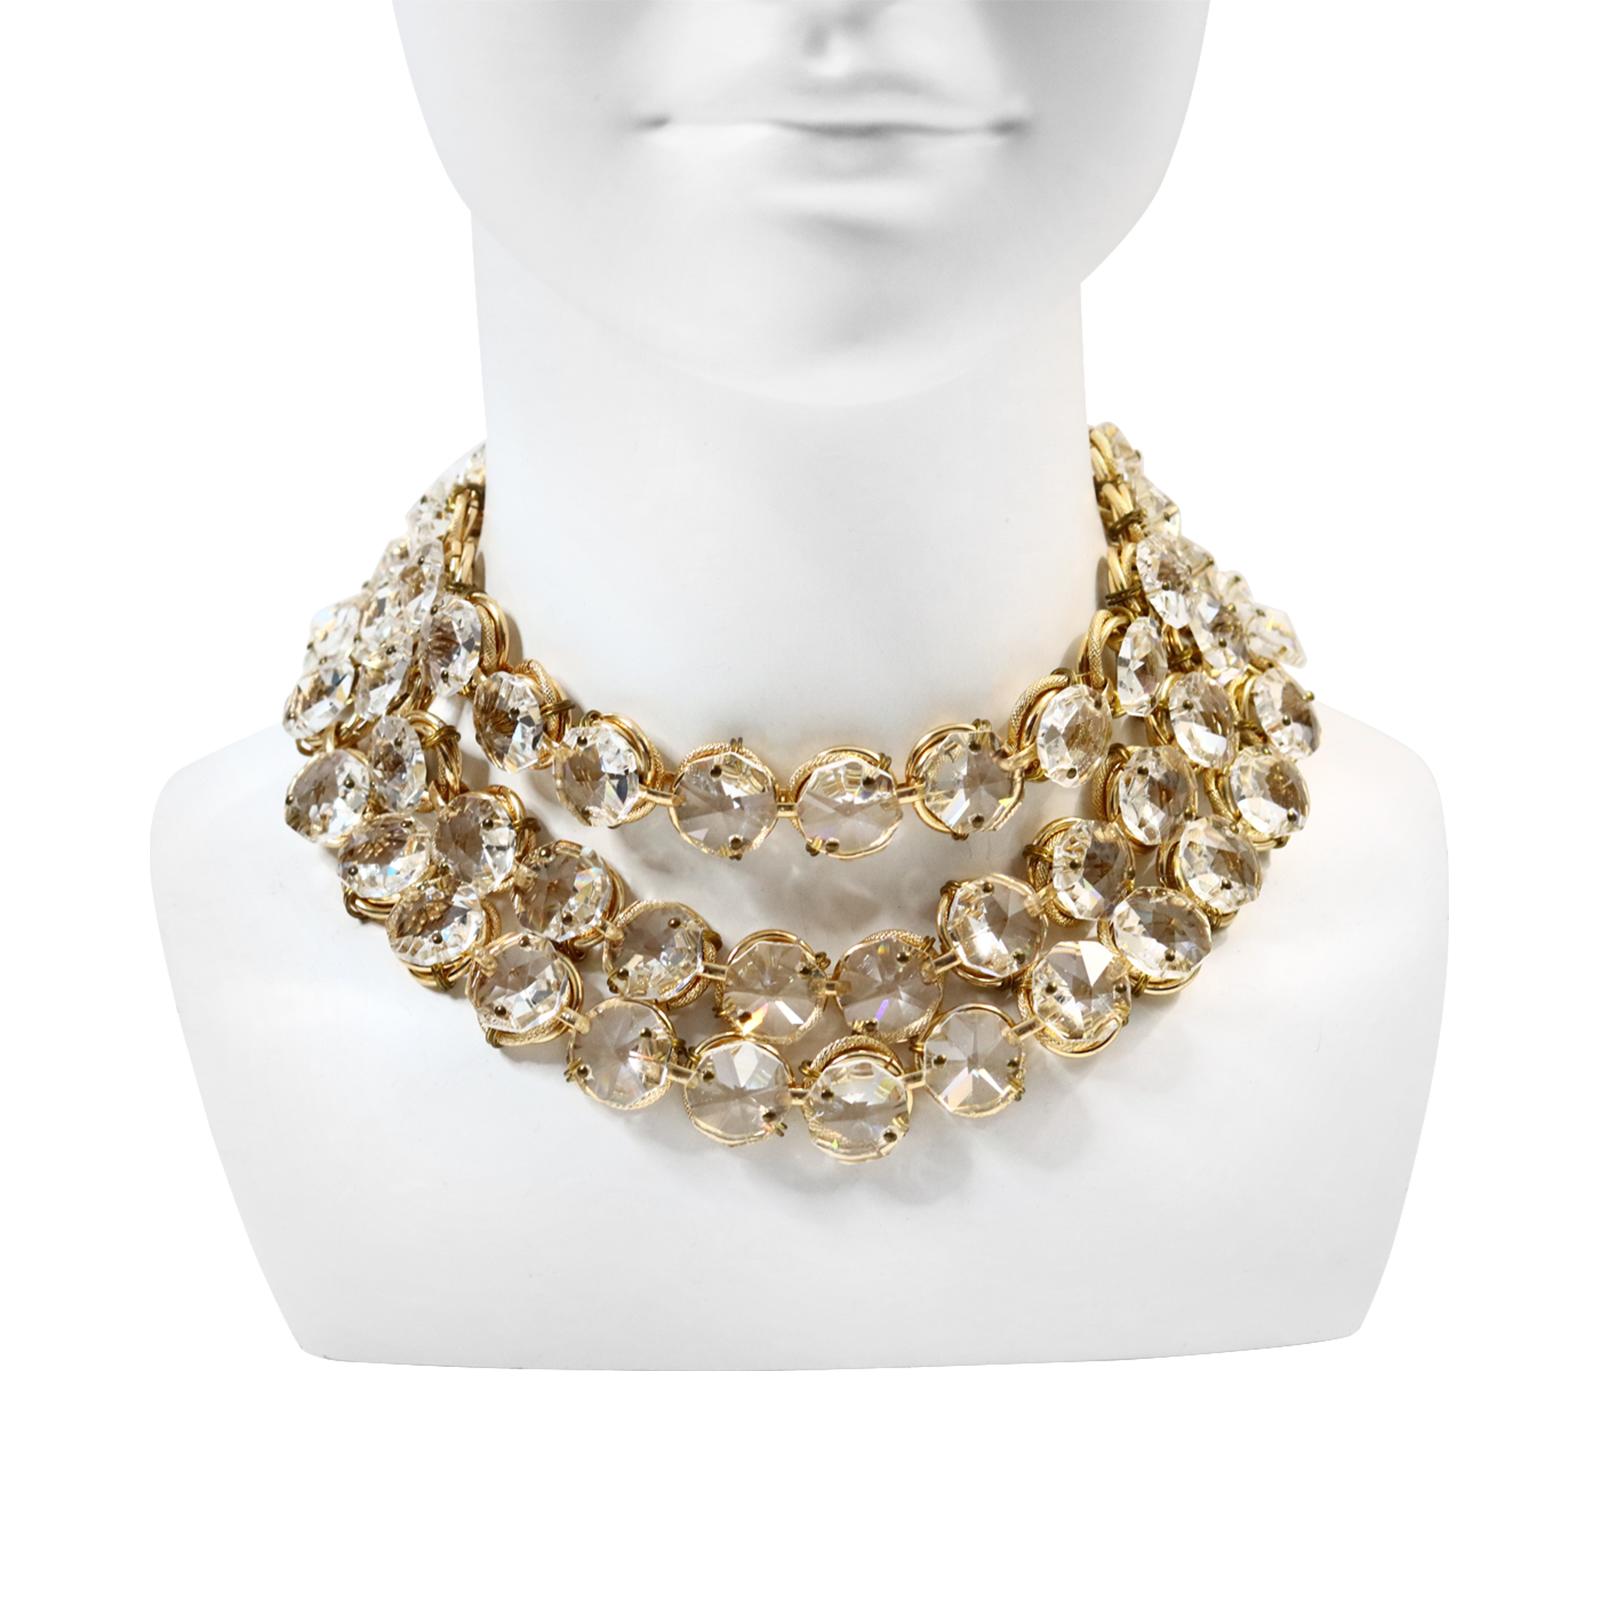 Vintage Poggi Paris Gold Tone With Large Crystals 3 Row Necklace Circa 1990s.  This is so gorgeous if I say so.  There are three rows of the crystals.  They fit between 15